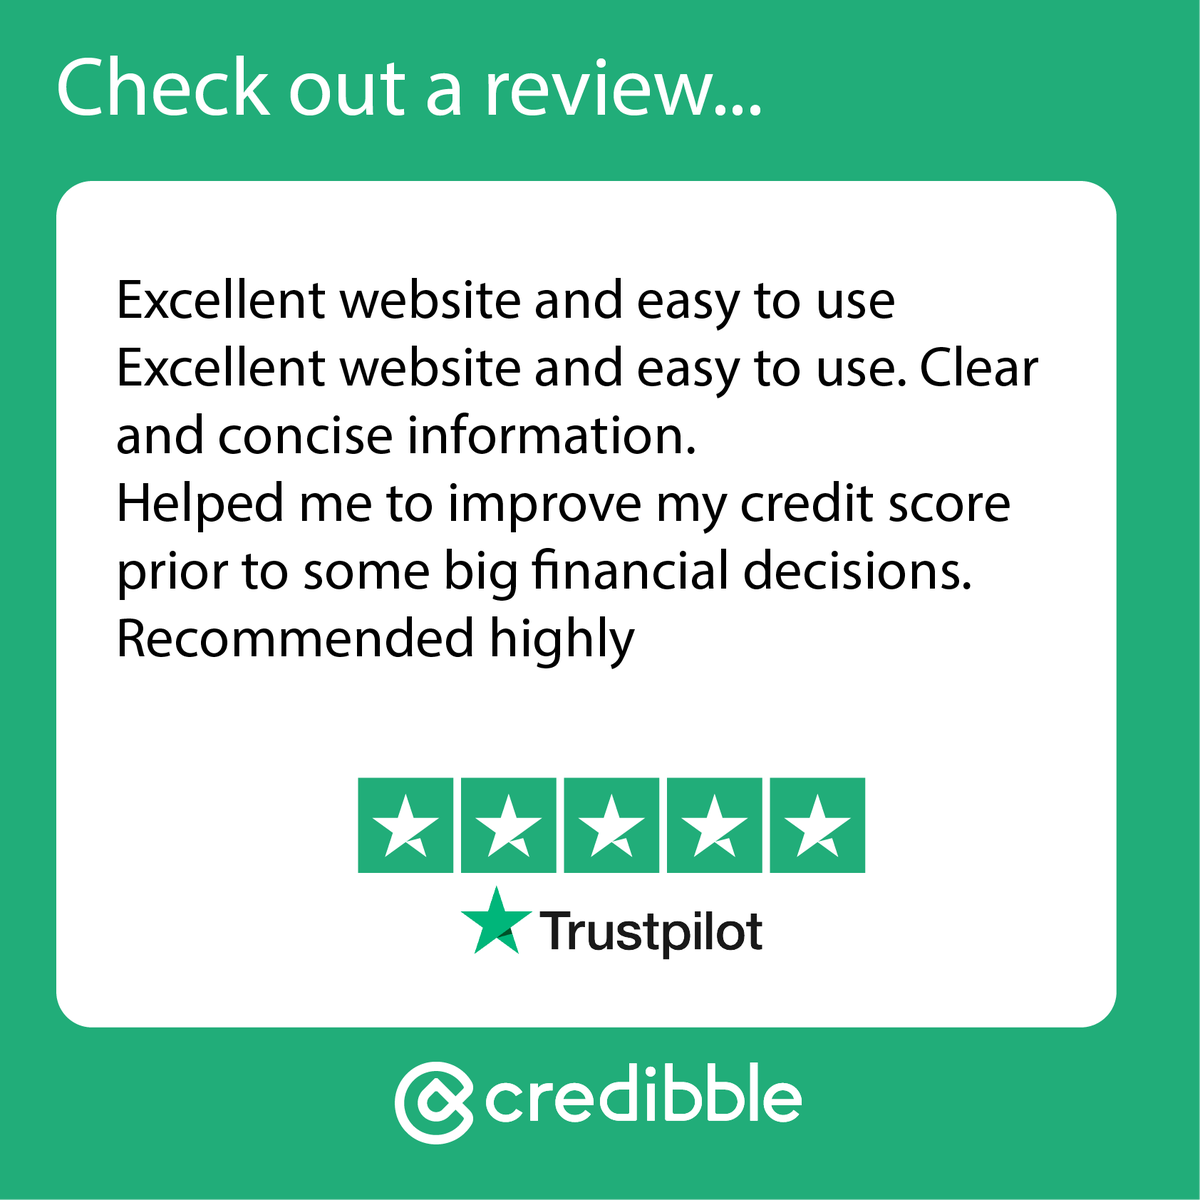 This lovely customer left us an amazing #review!  #Credibble aims to help all it's users achieve their #financialgoals 🙌

#userreviews #satisfied #5stars #trustpilot